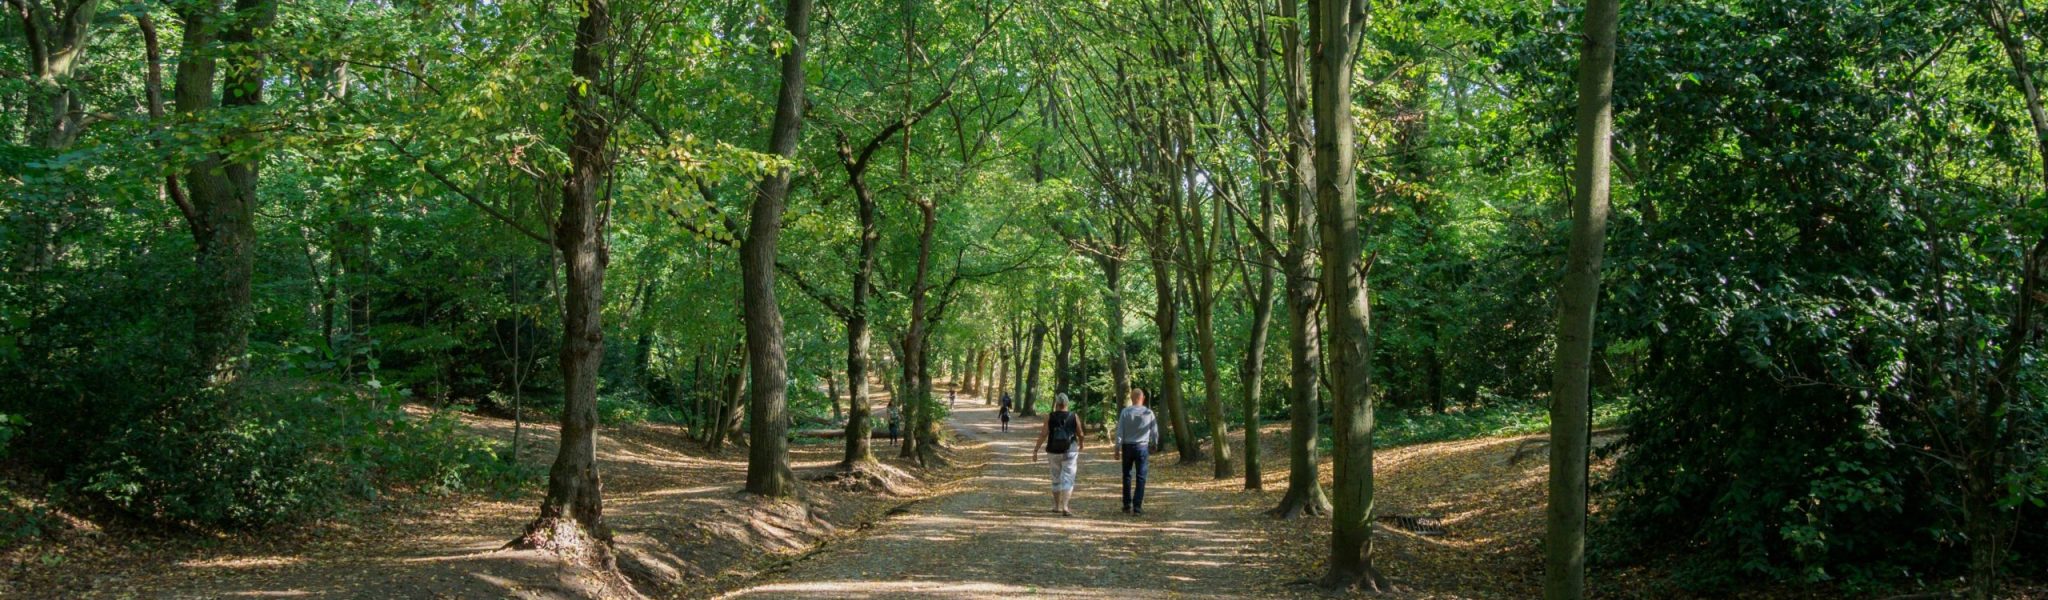 People walking on a large path in a forest in a park in North London